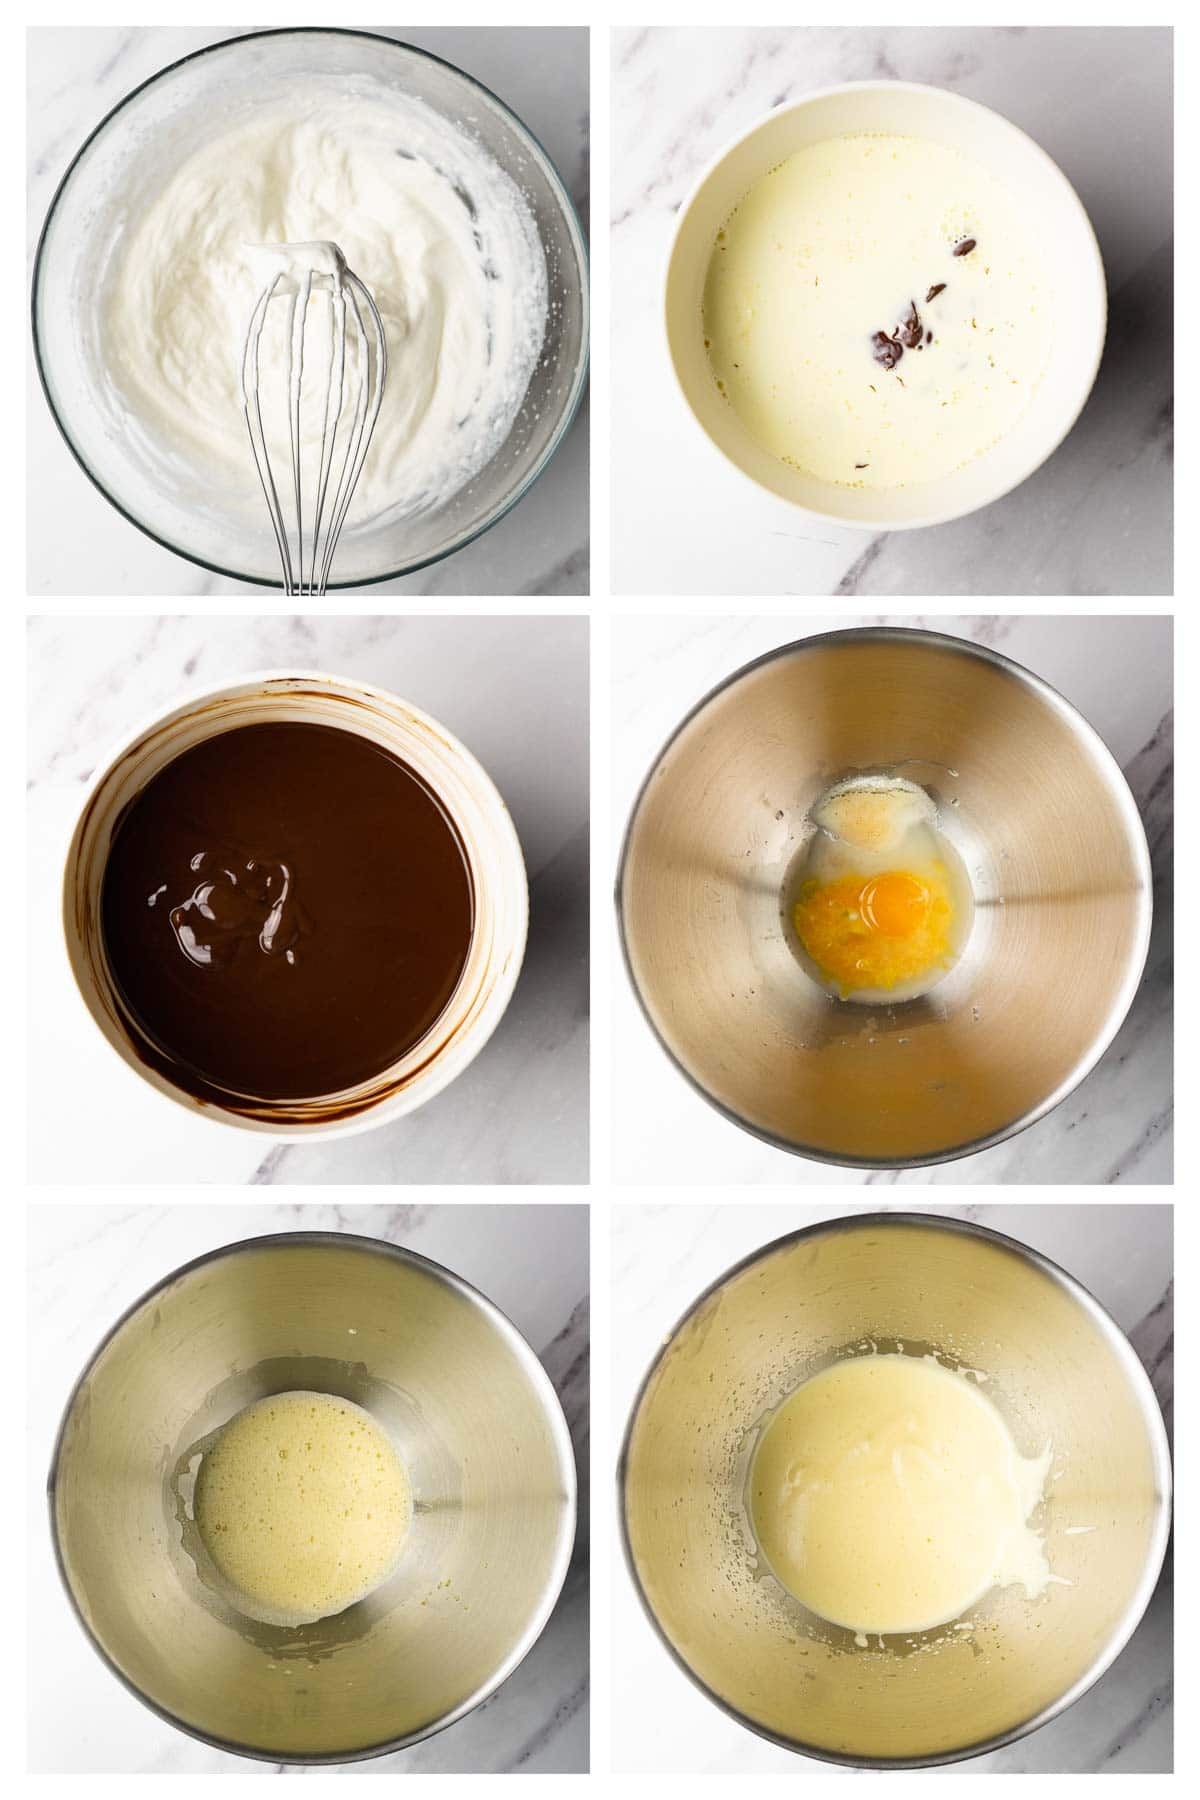 6 images showing step by step directions to make chocolate mousse.